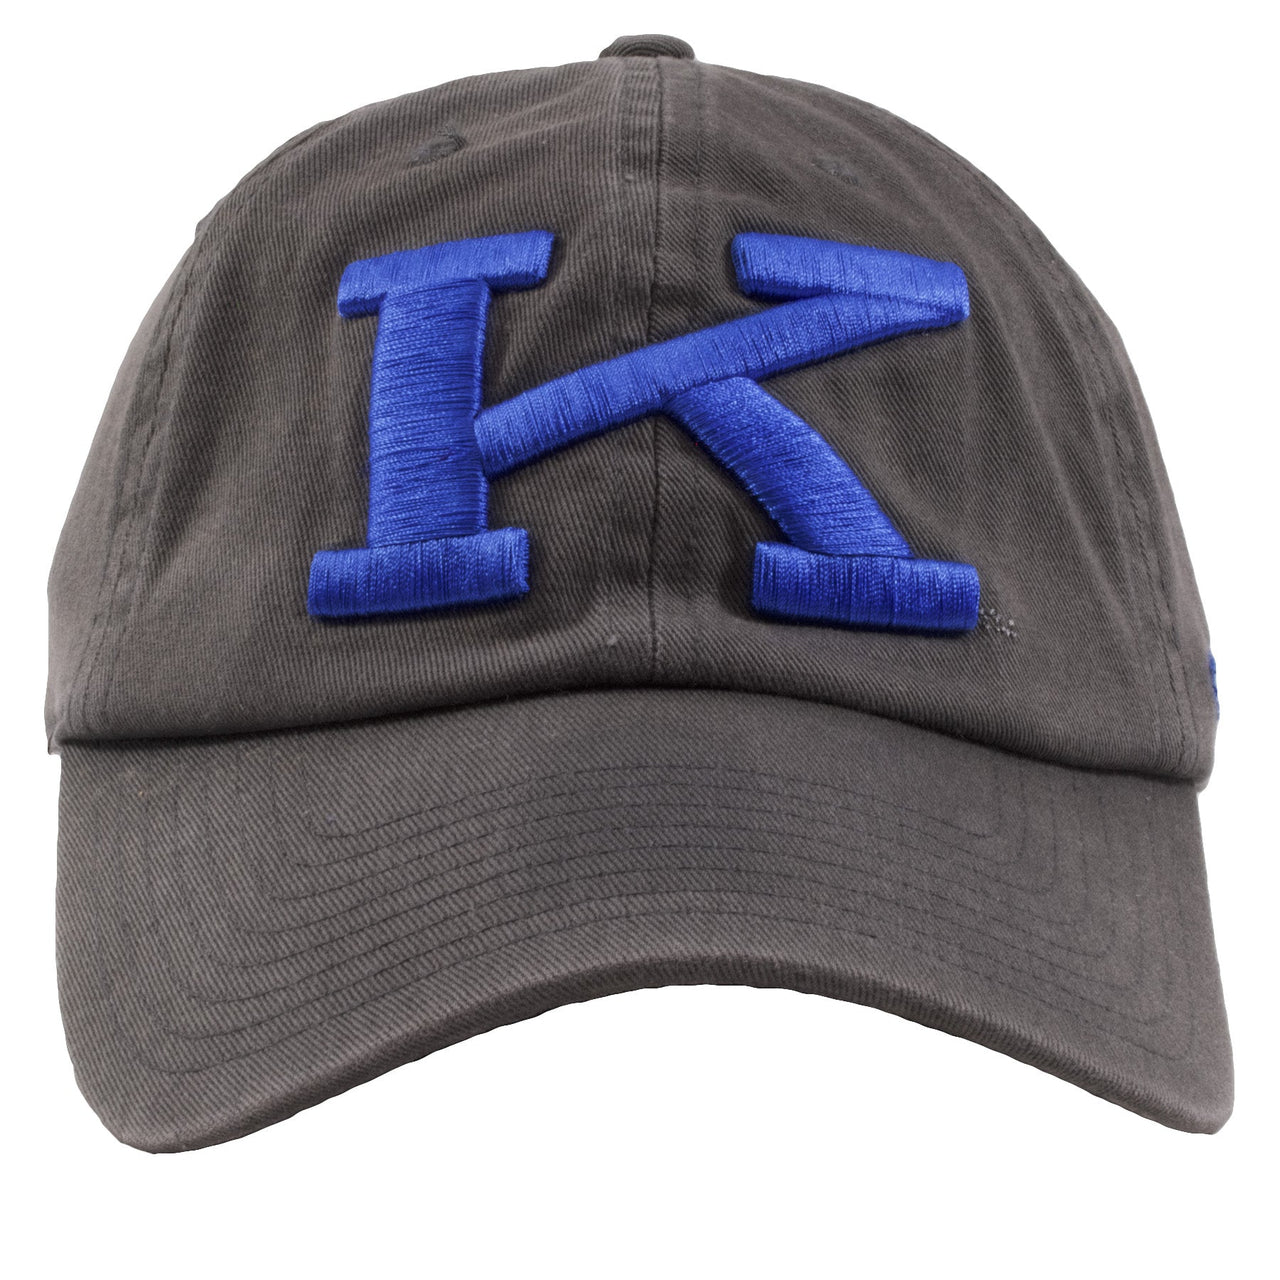 Embroidered on the front of the University of Kentucky charcoal dad hat, the Kentucky K logo is embroidered in blue